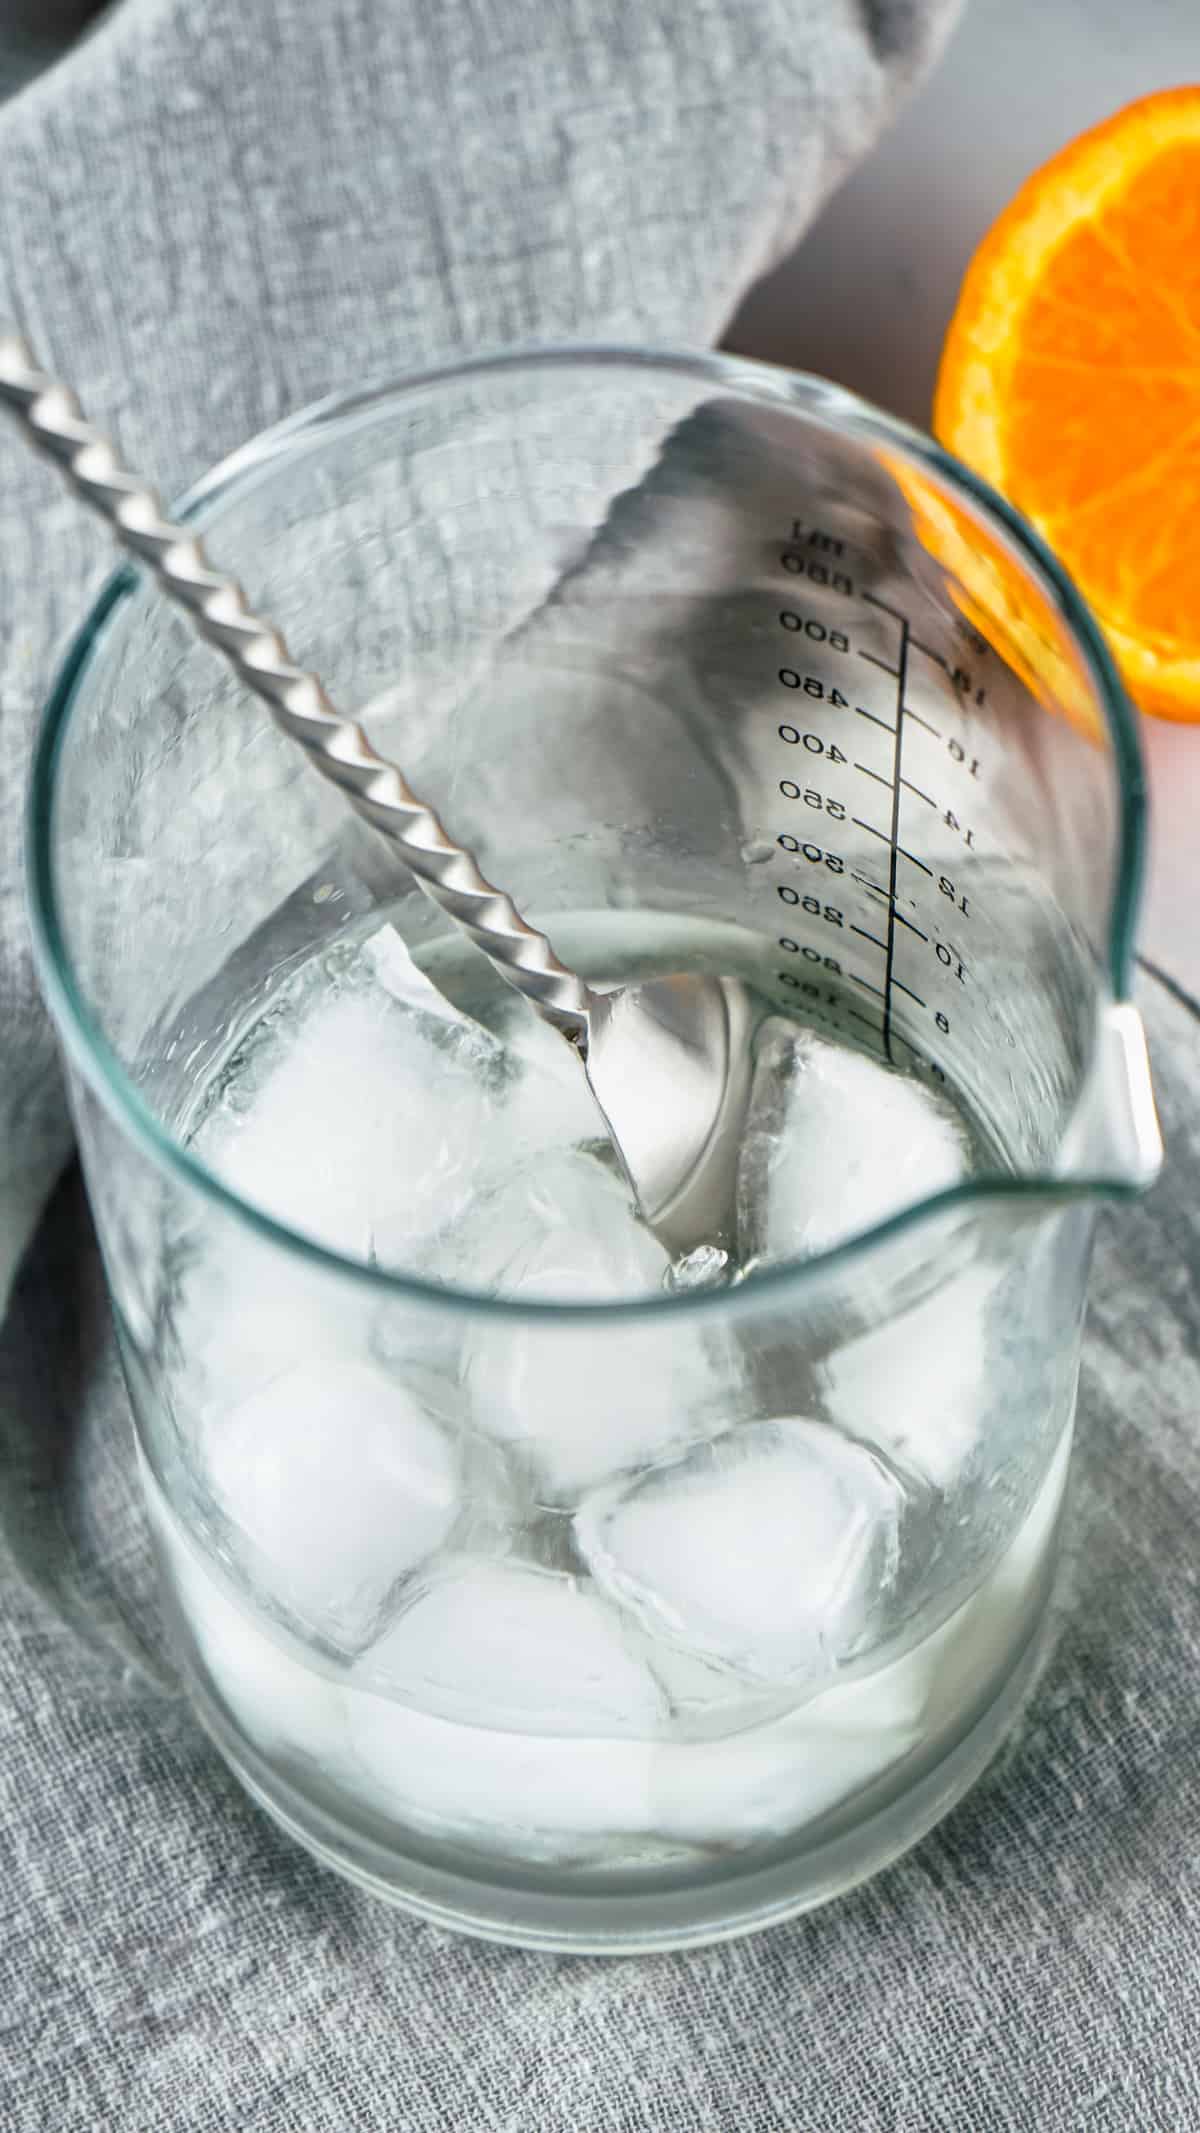 mixing gin and vermouth with ice to make Traditional Gin Martini